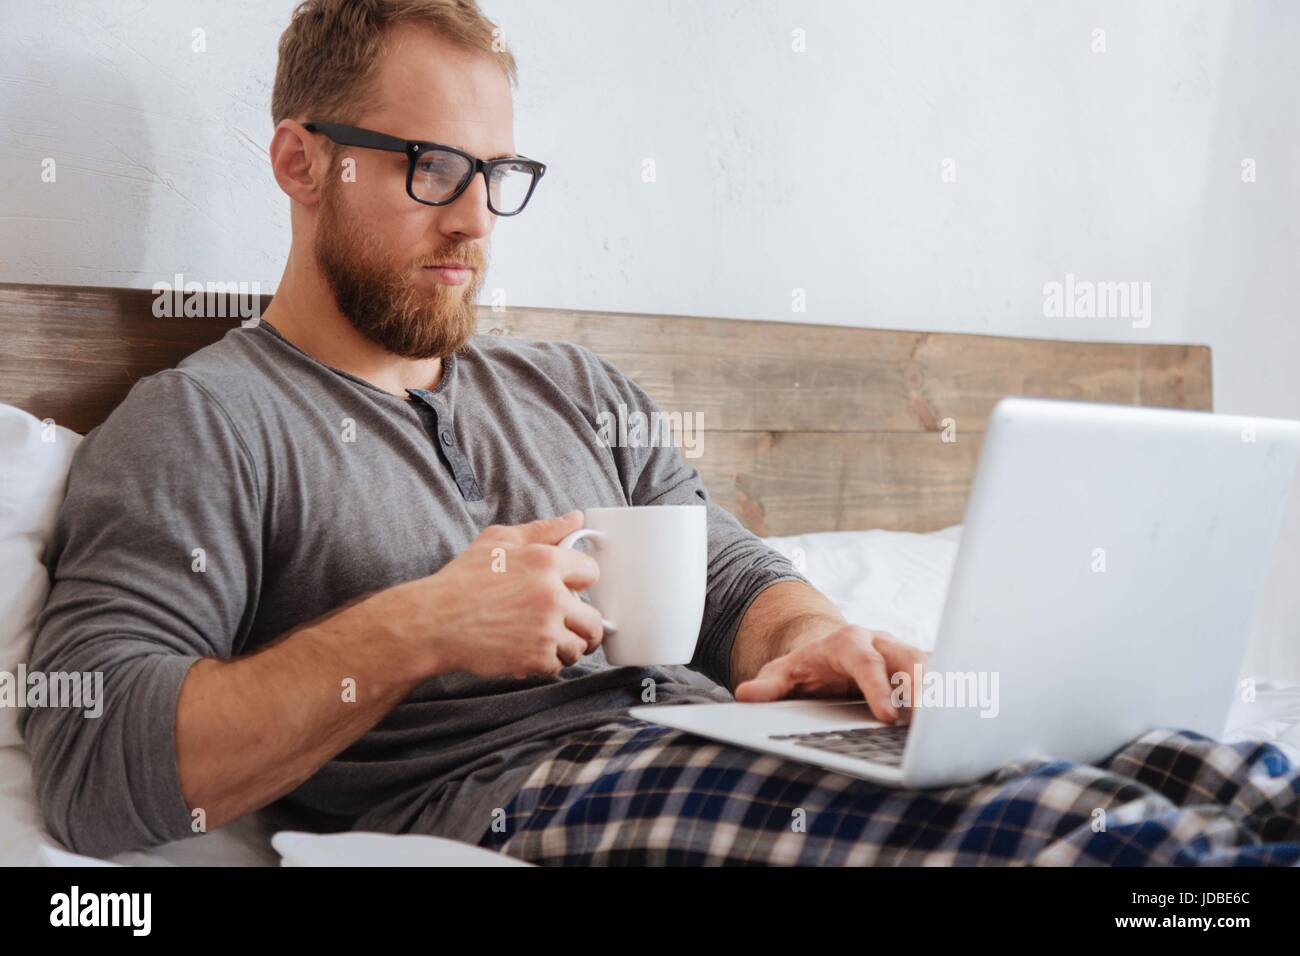 Handsome bearded man working with laptop in bed Stock Photo